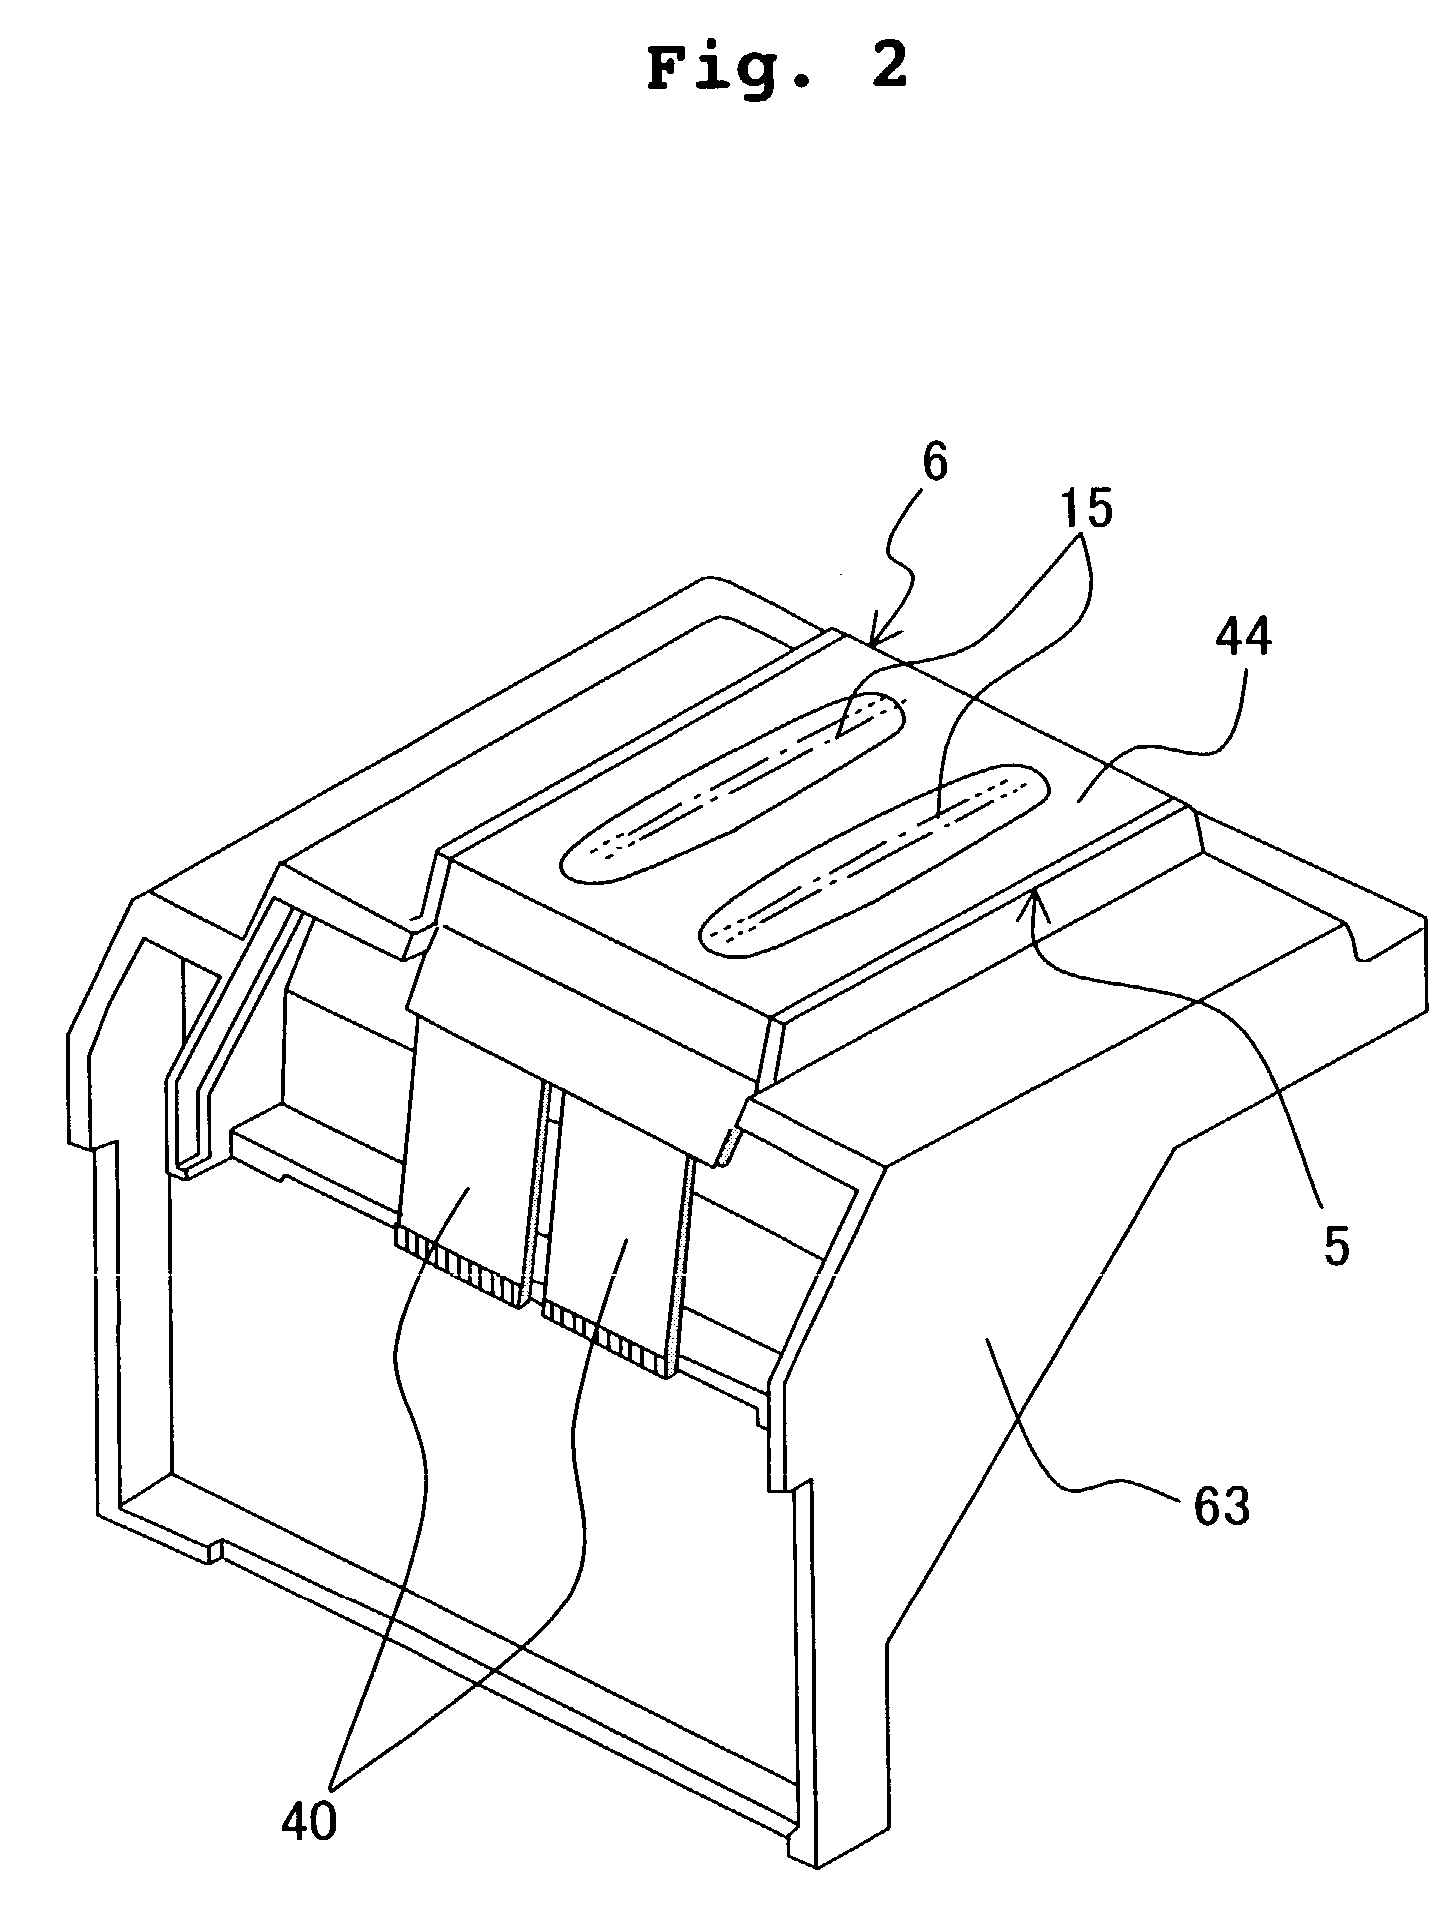 Droplet-jetting device with pressure chamber expandable by elongation of pressure-generating section